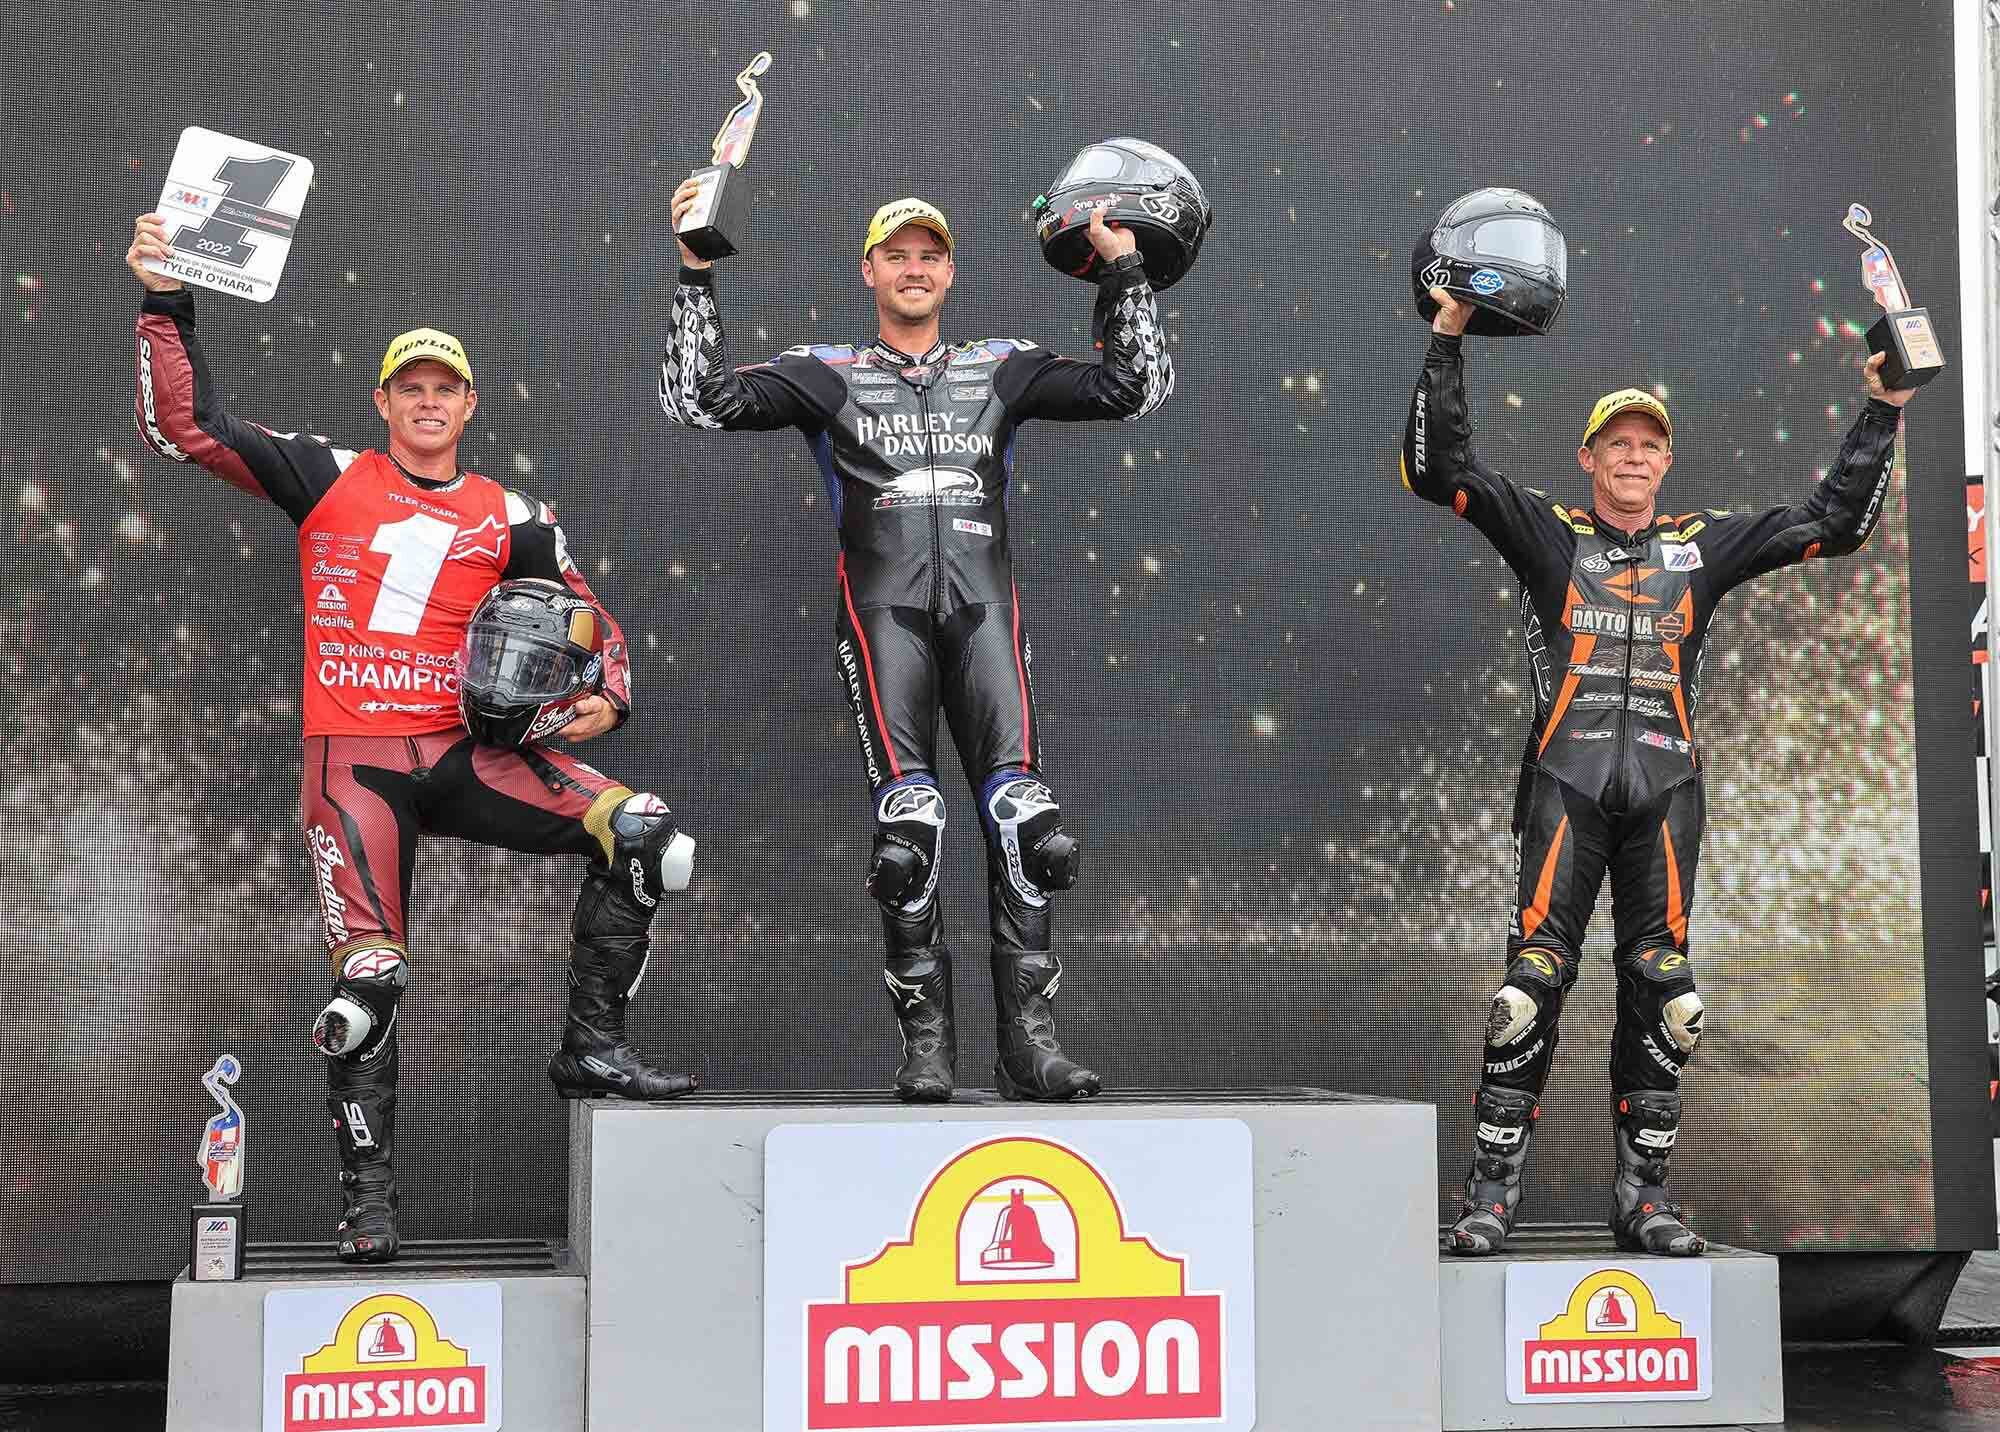 New Jersey had Kyle Wyman at the top of the podium, followed by Tyler O'Hara, second from the left (and newly crowned series champion).  Michael Barnes (right) finished third.